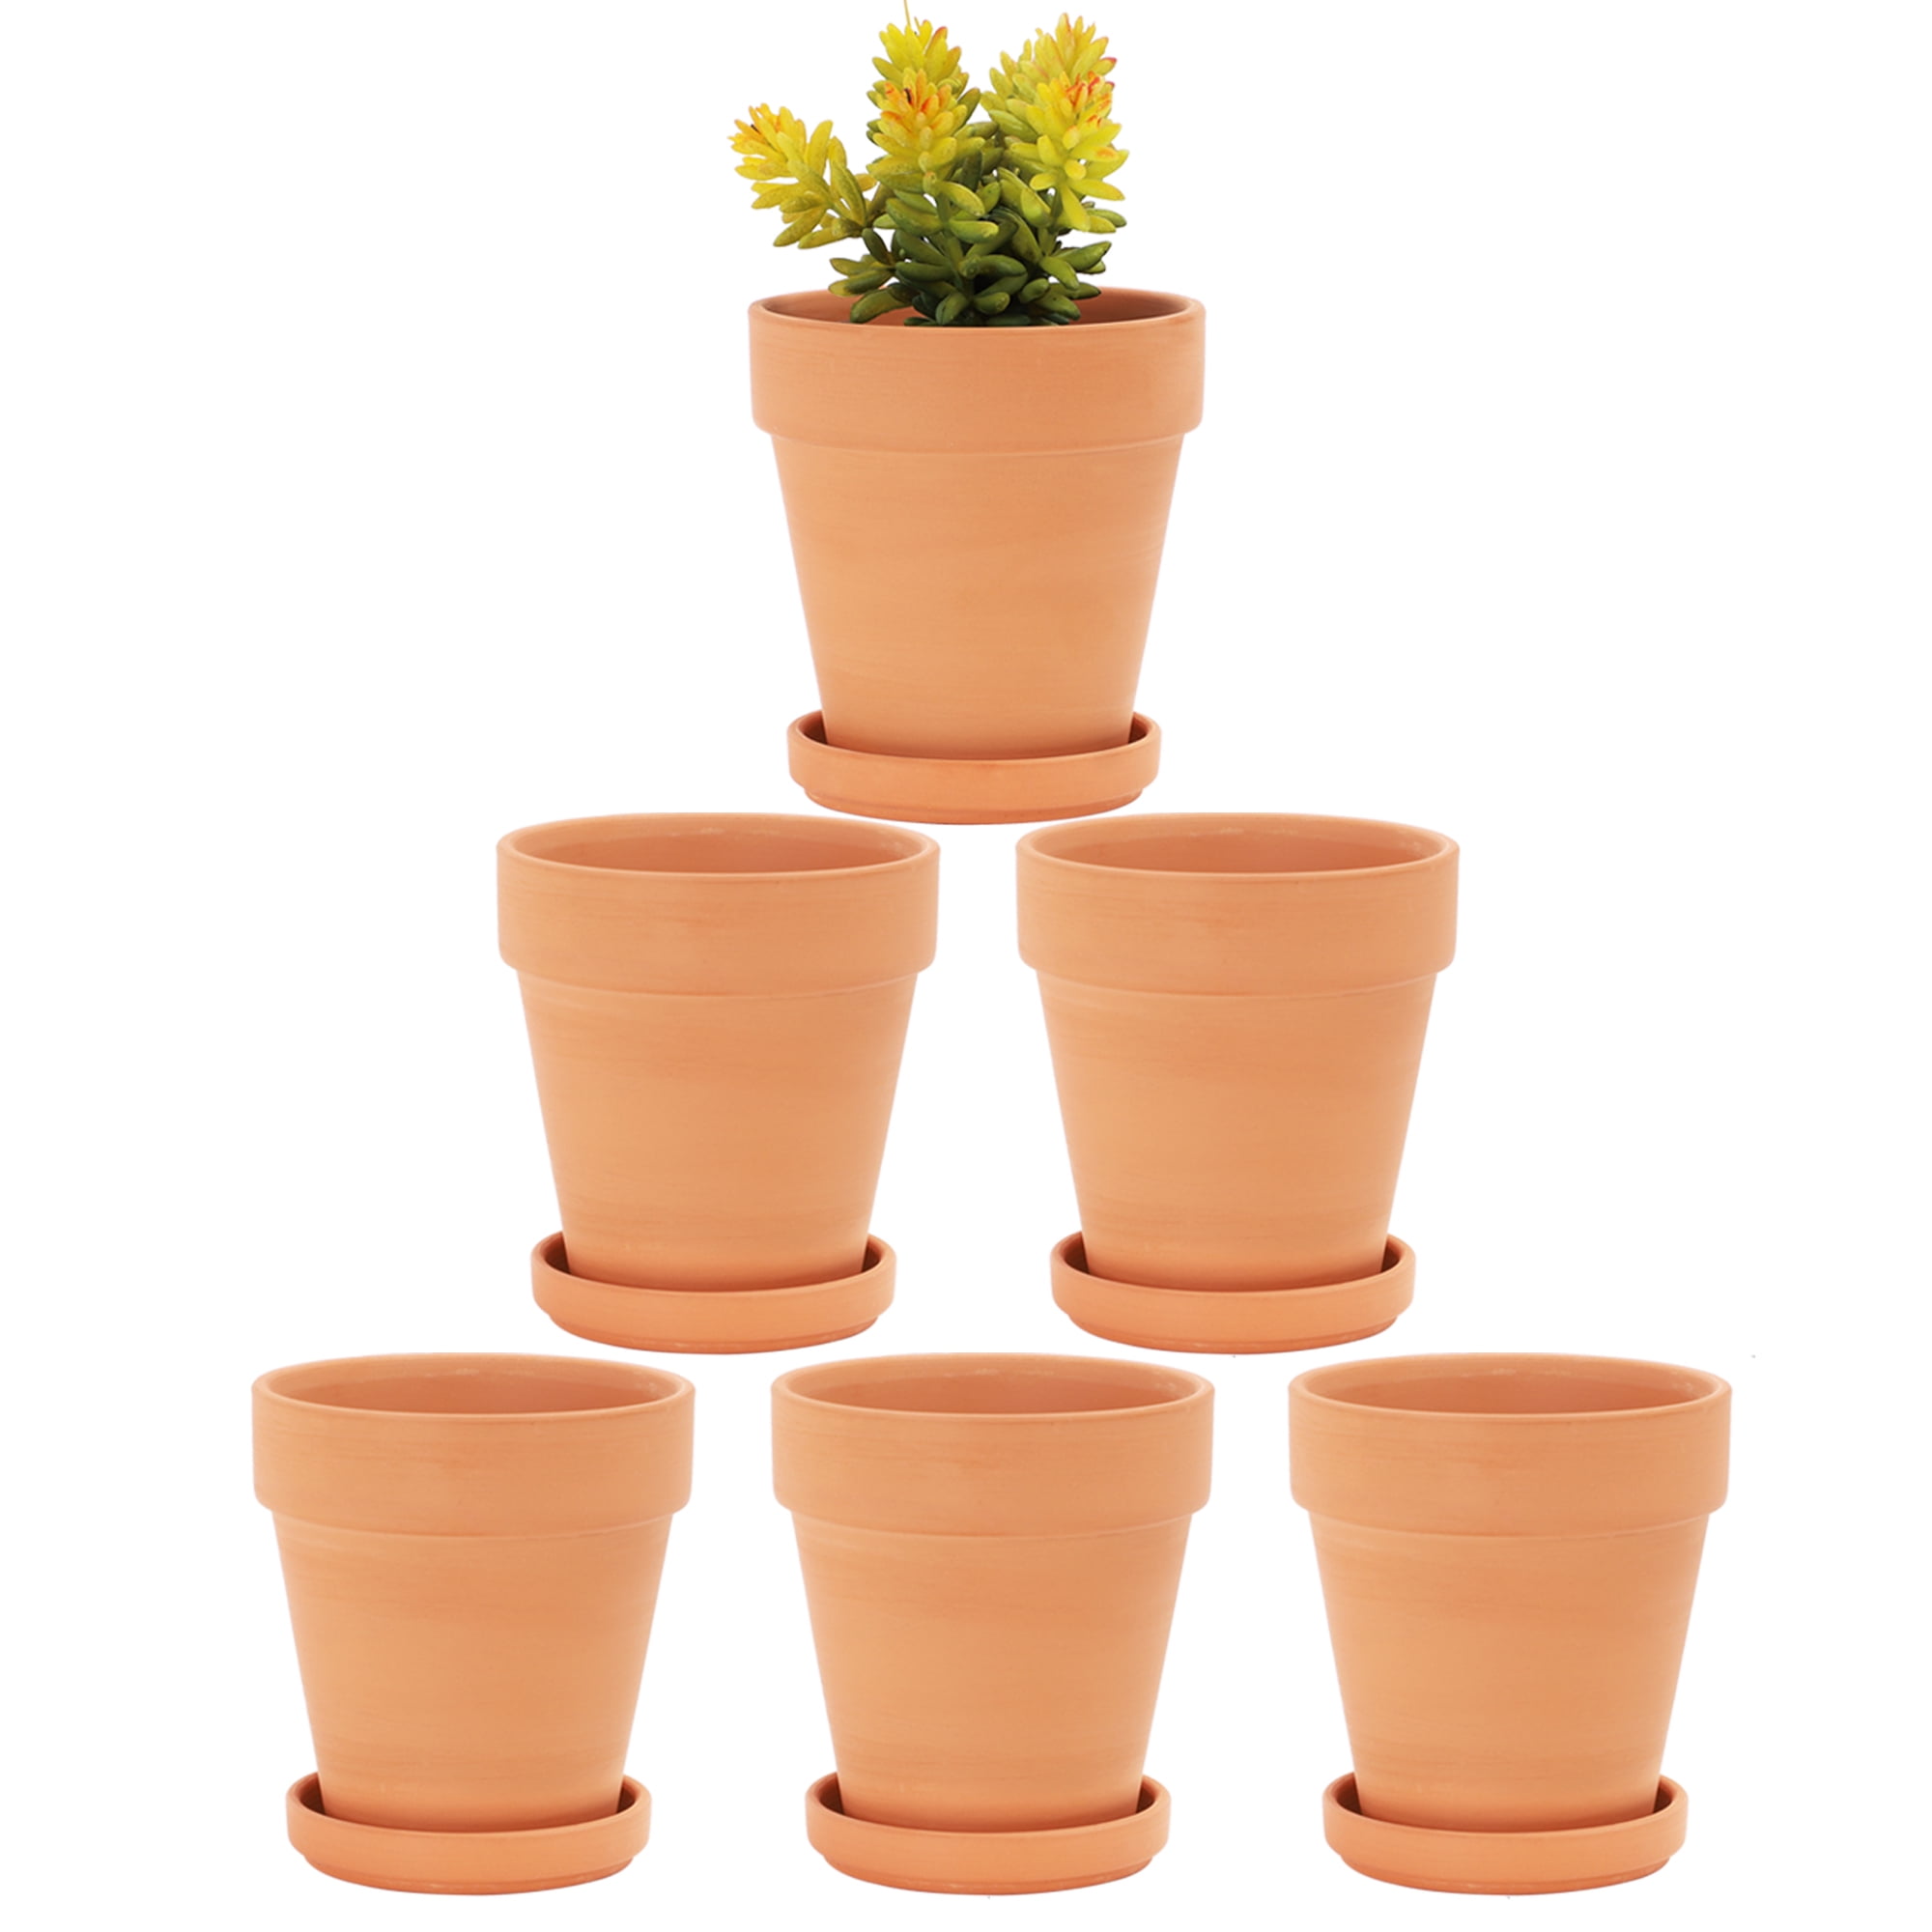 4 Pack Large 6'' Terra Cotta Plant Yishang Large Terra Cotta Pots With Saucer 